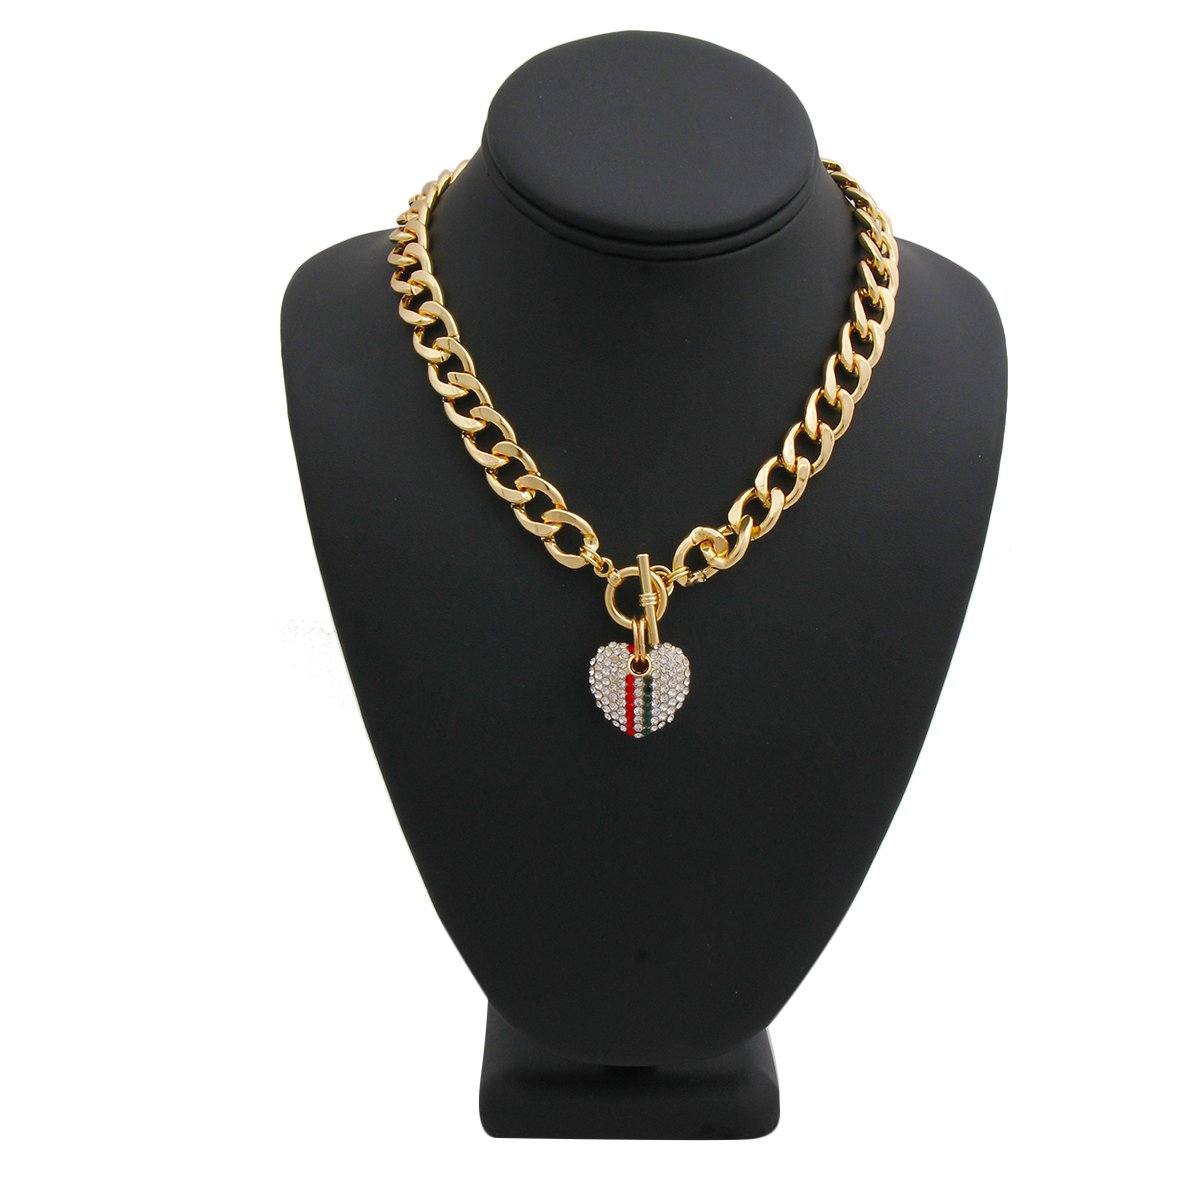 Designer Style Red and Green Rhinestone Striped Heart Toggle Necklace